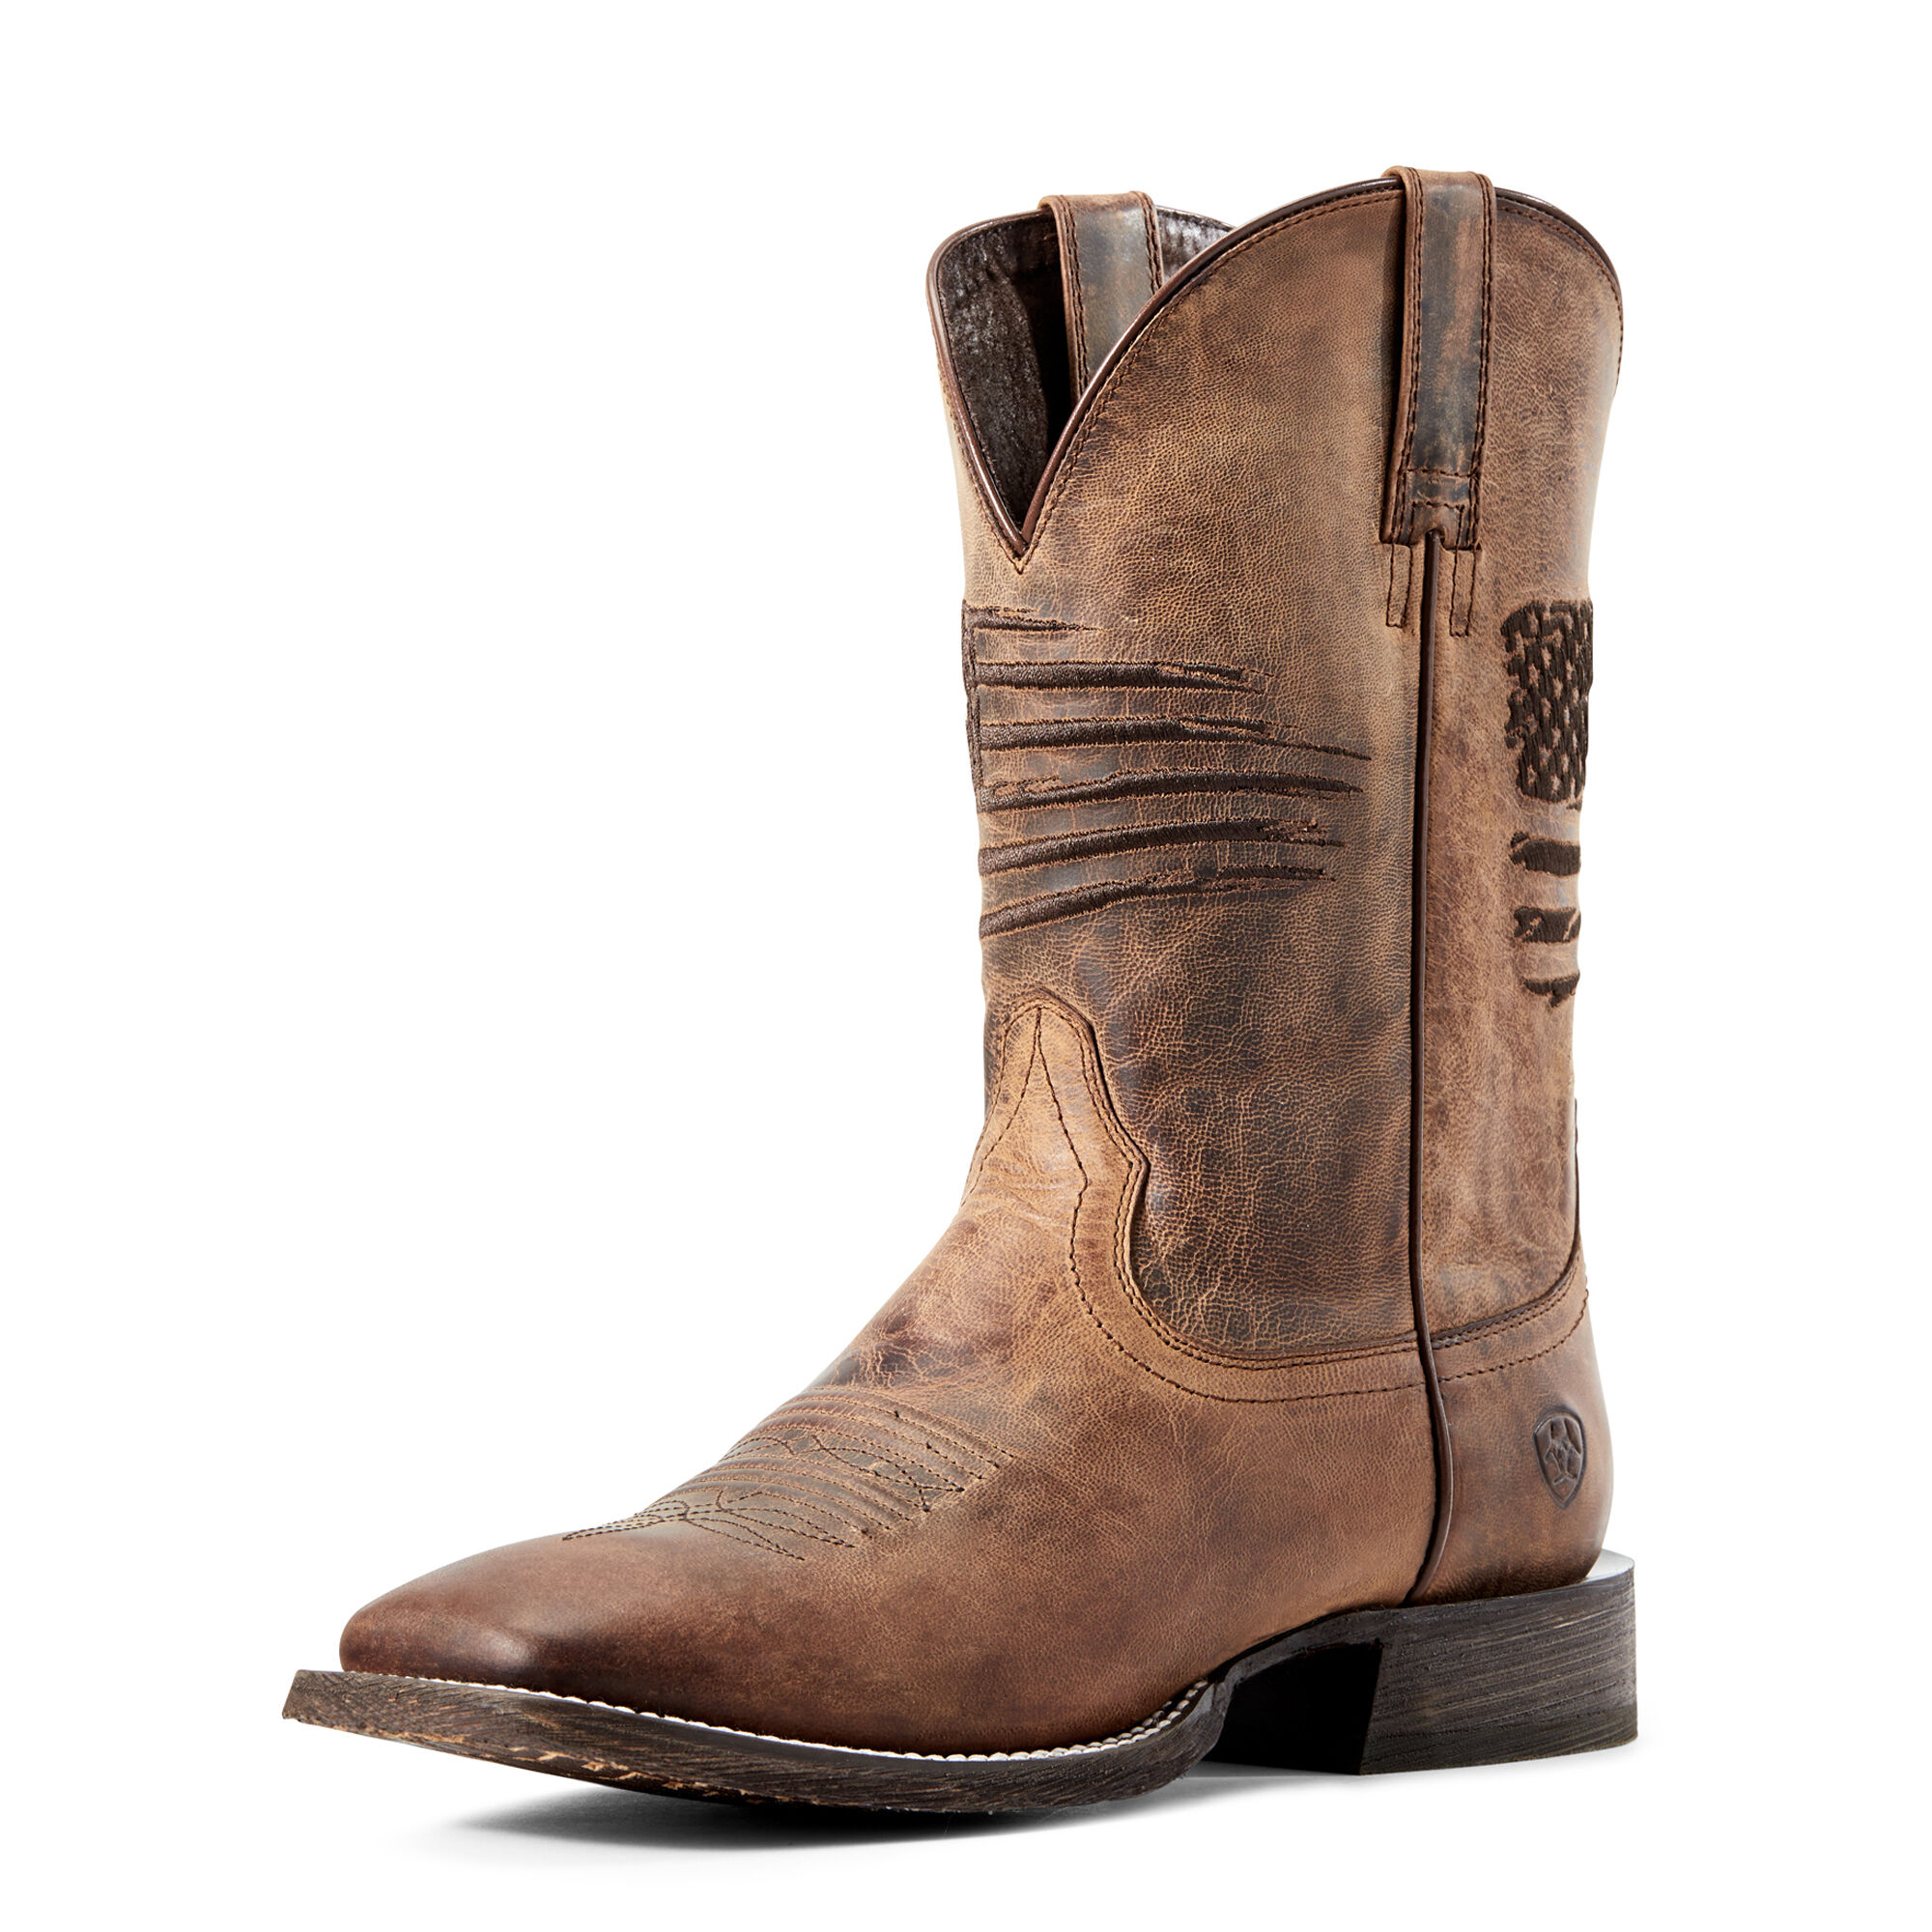 Ariat 10029699 Men's Weathered Tan Circuit Patriot Wide Square Toe Western Boot